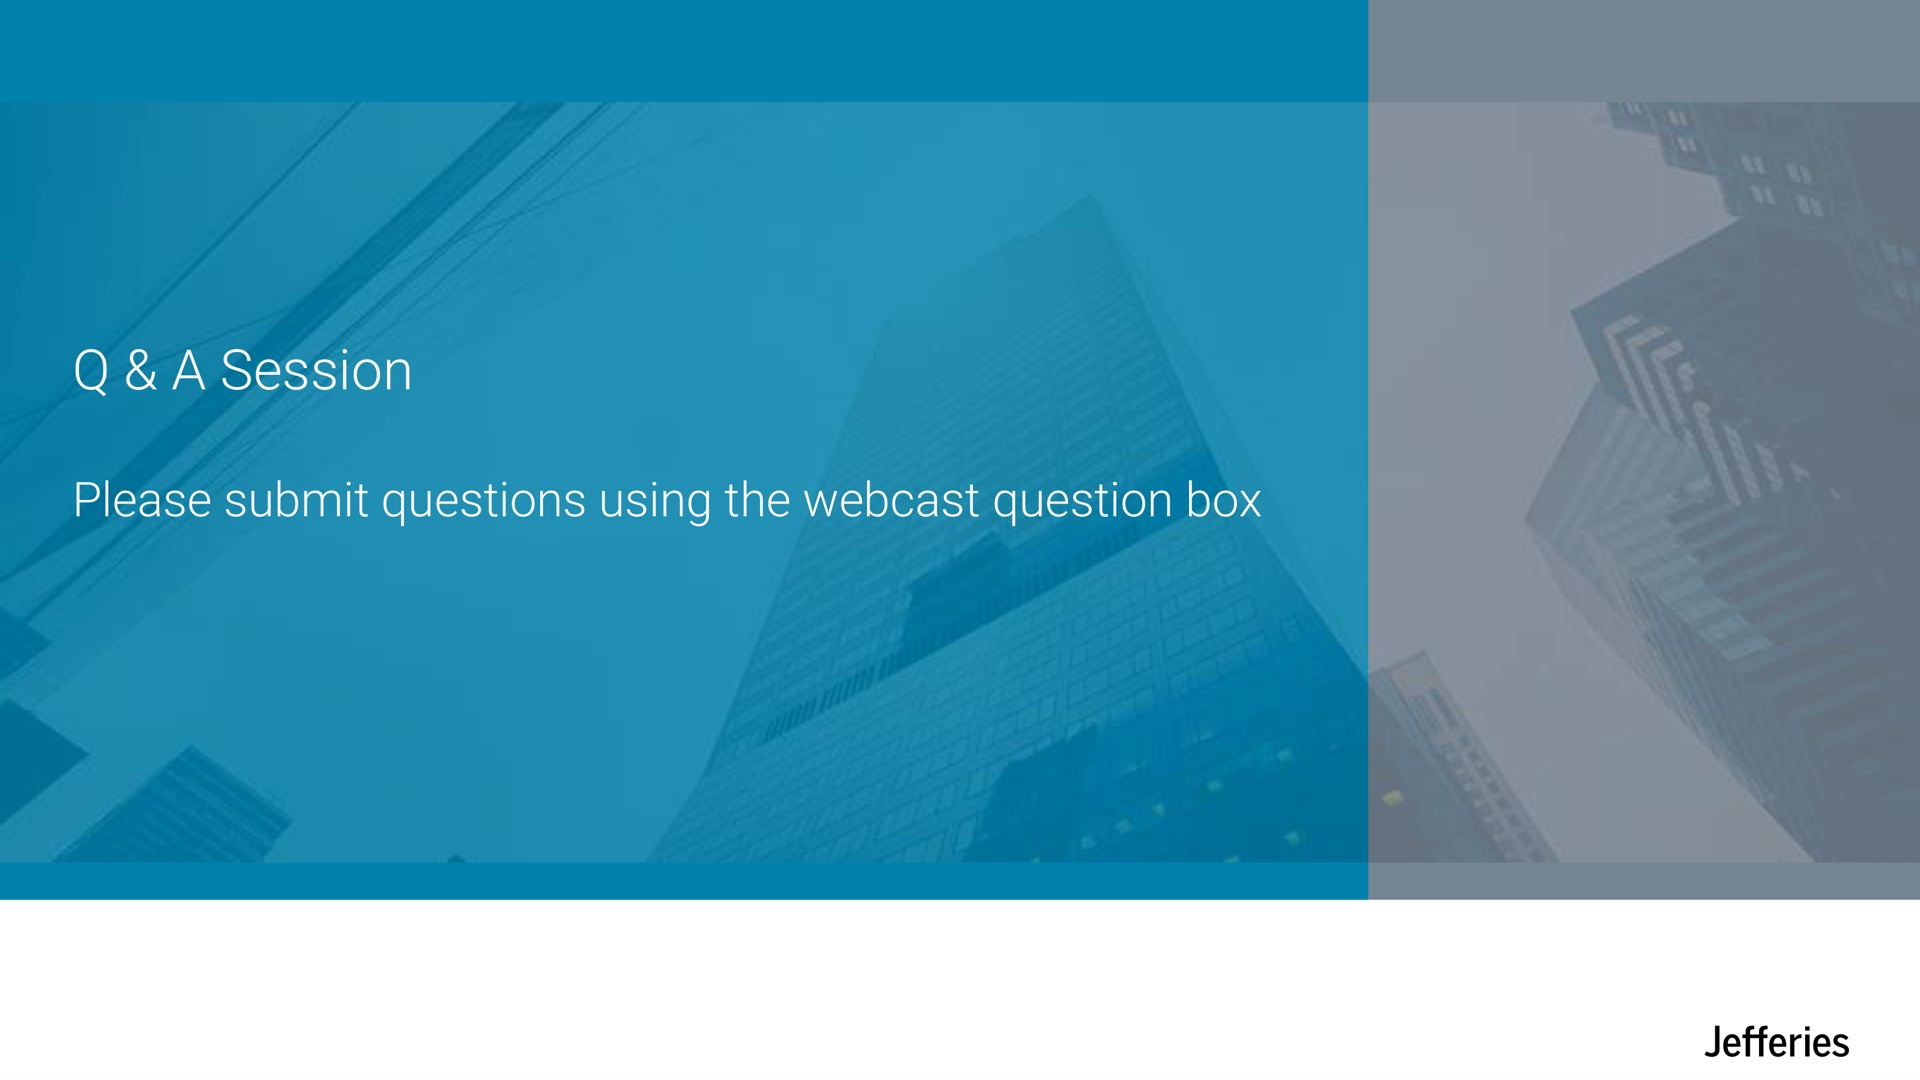 a session please submit questions using the question box | Jefferies Financial Group